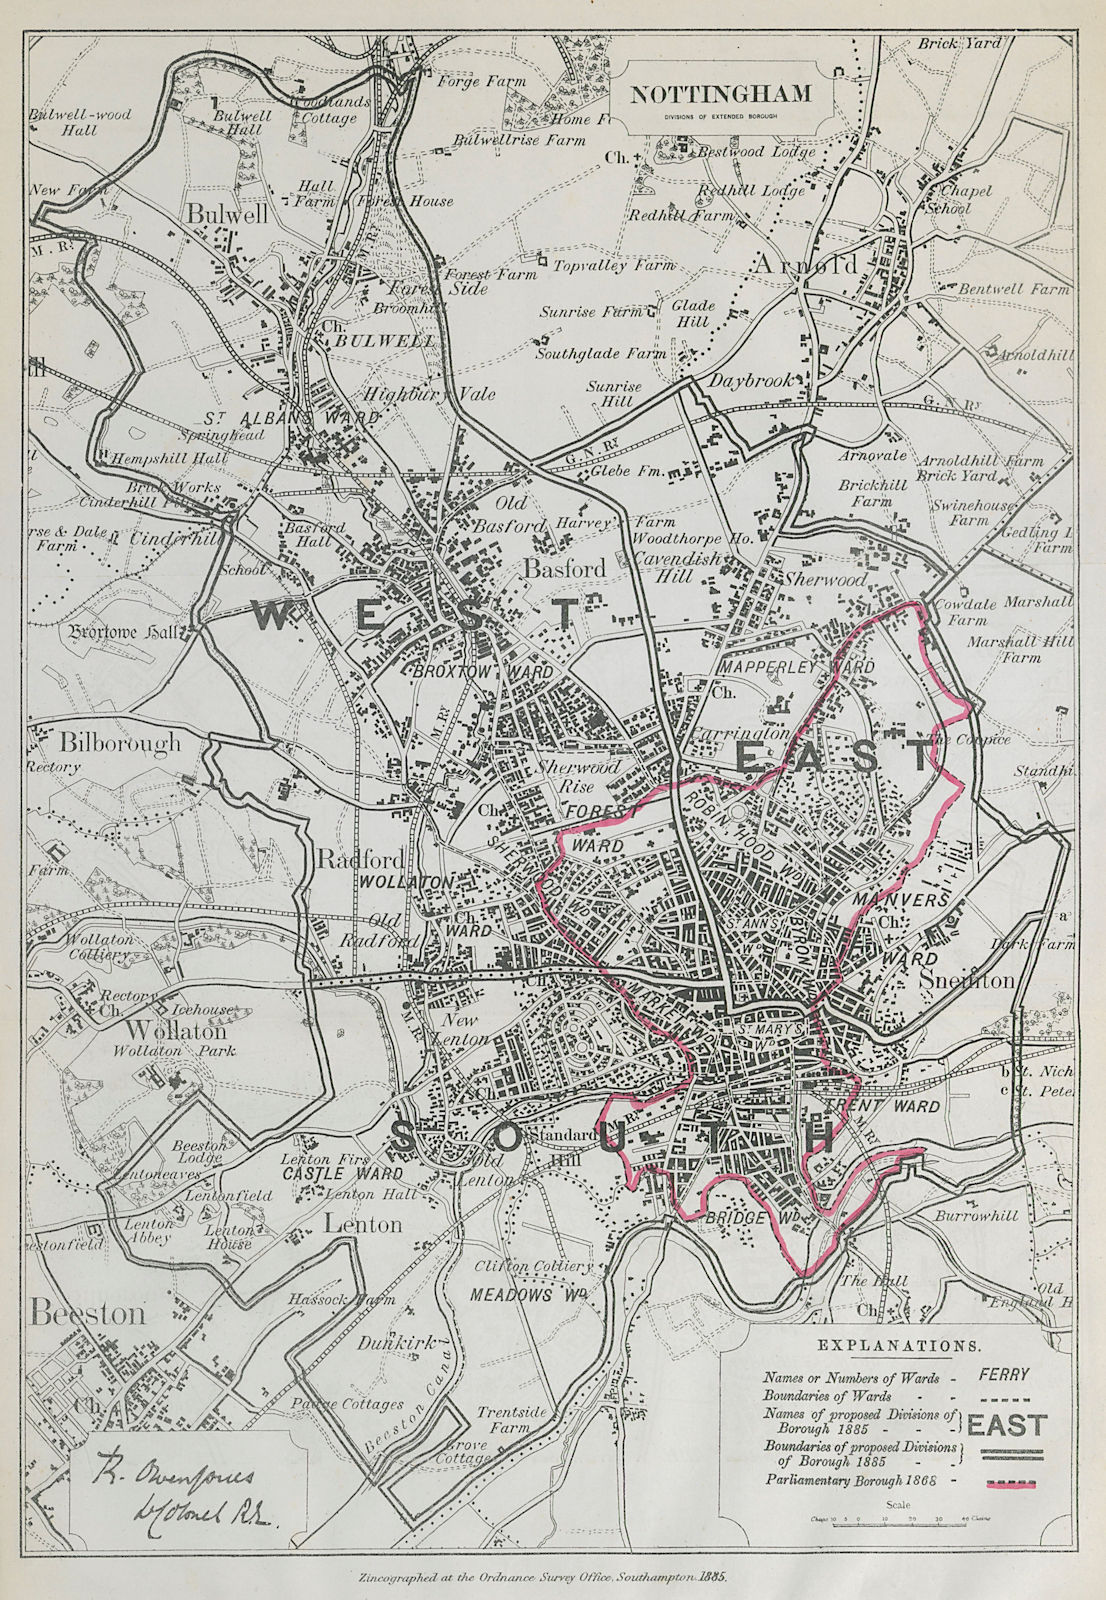 Associate Product Nottingham Parliamentary Borough. Broxtow Bulwell. BOUNDARY COMMISSION 1885 map